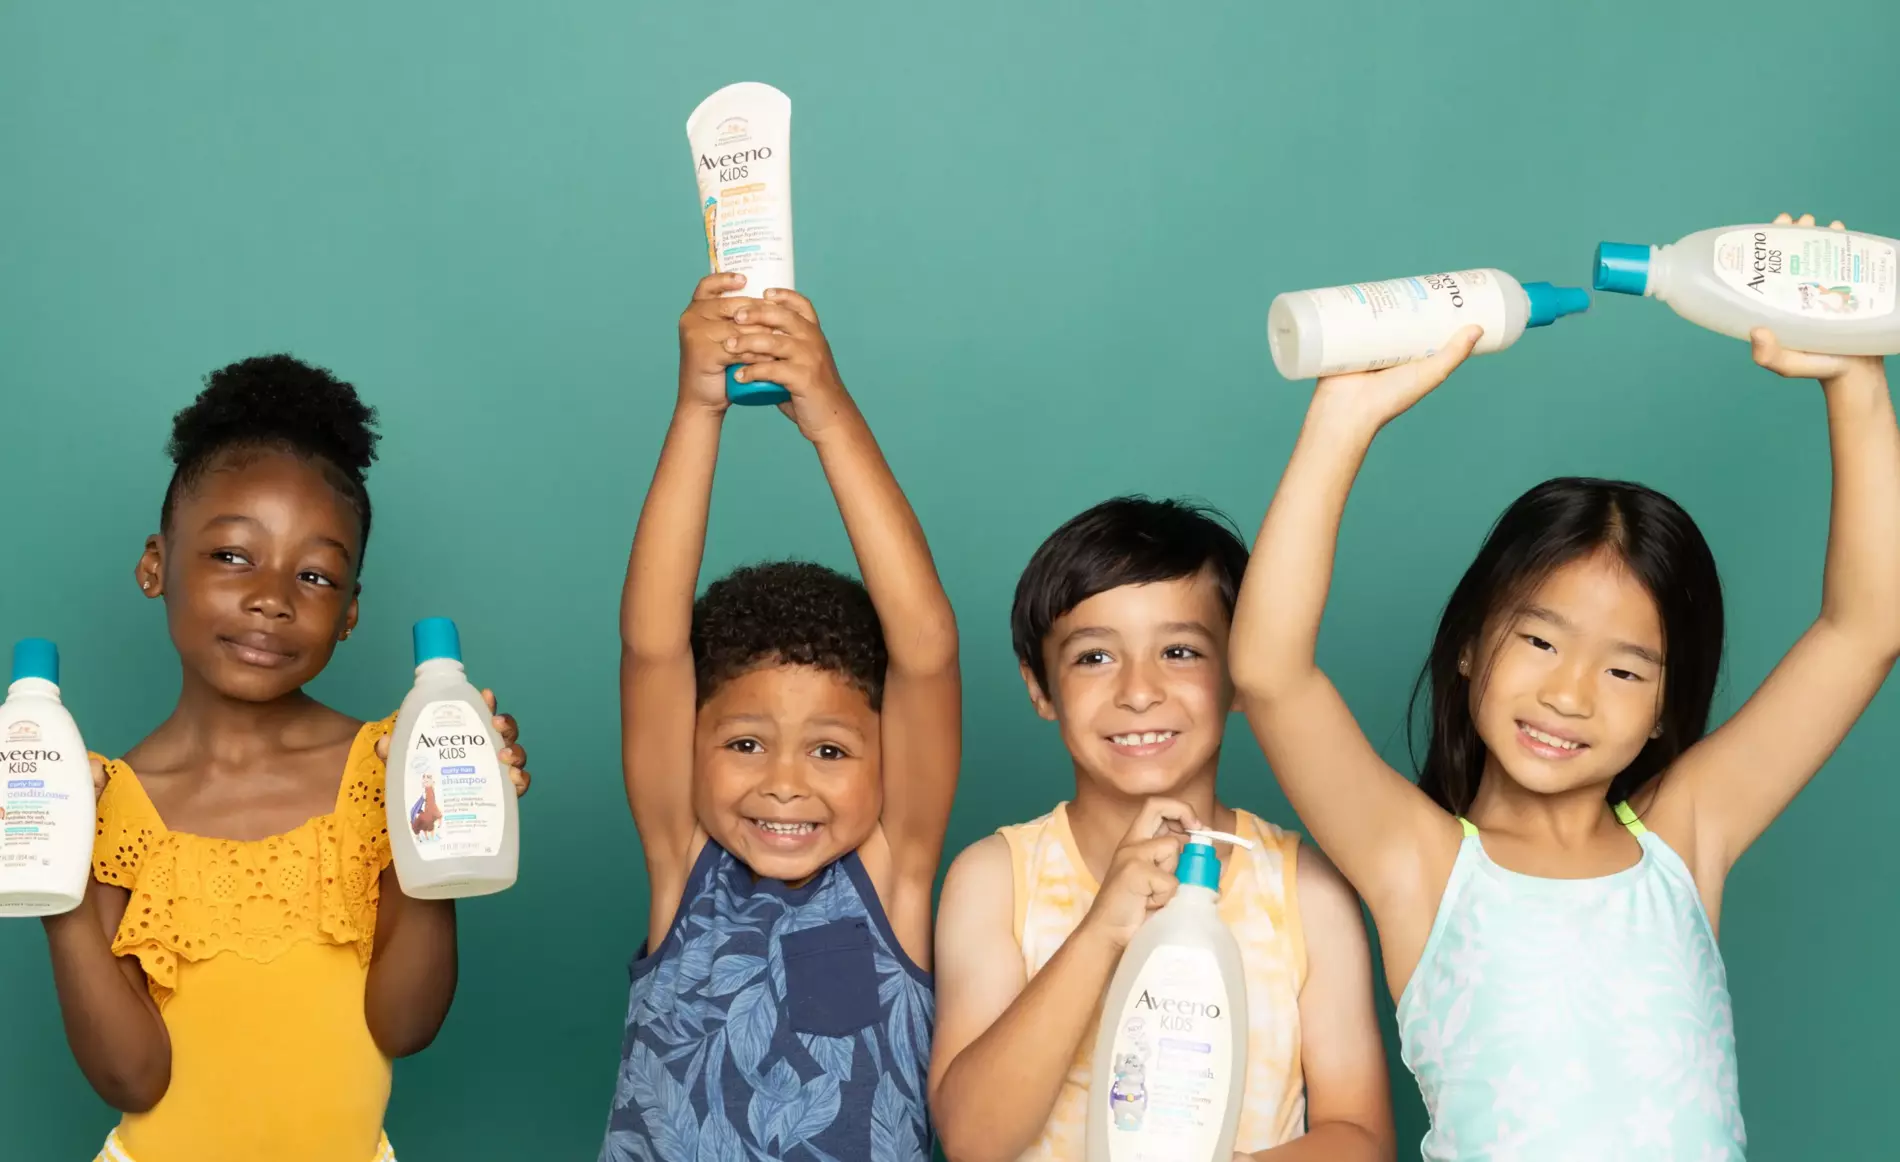 a group of children are holding Aveeno Kids products